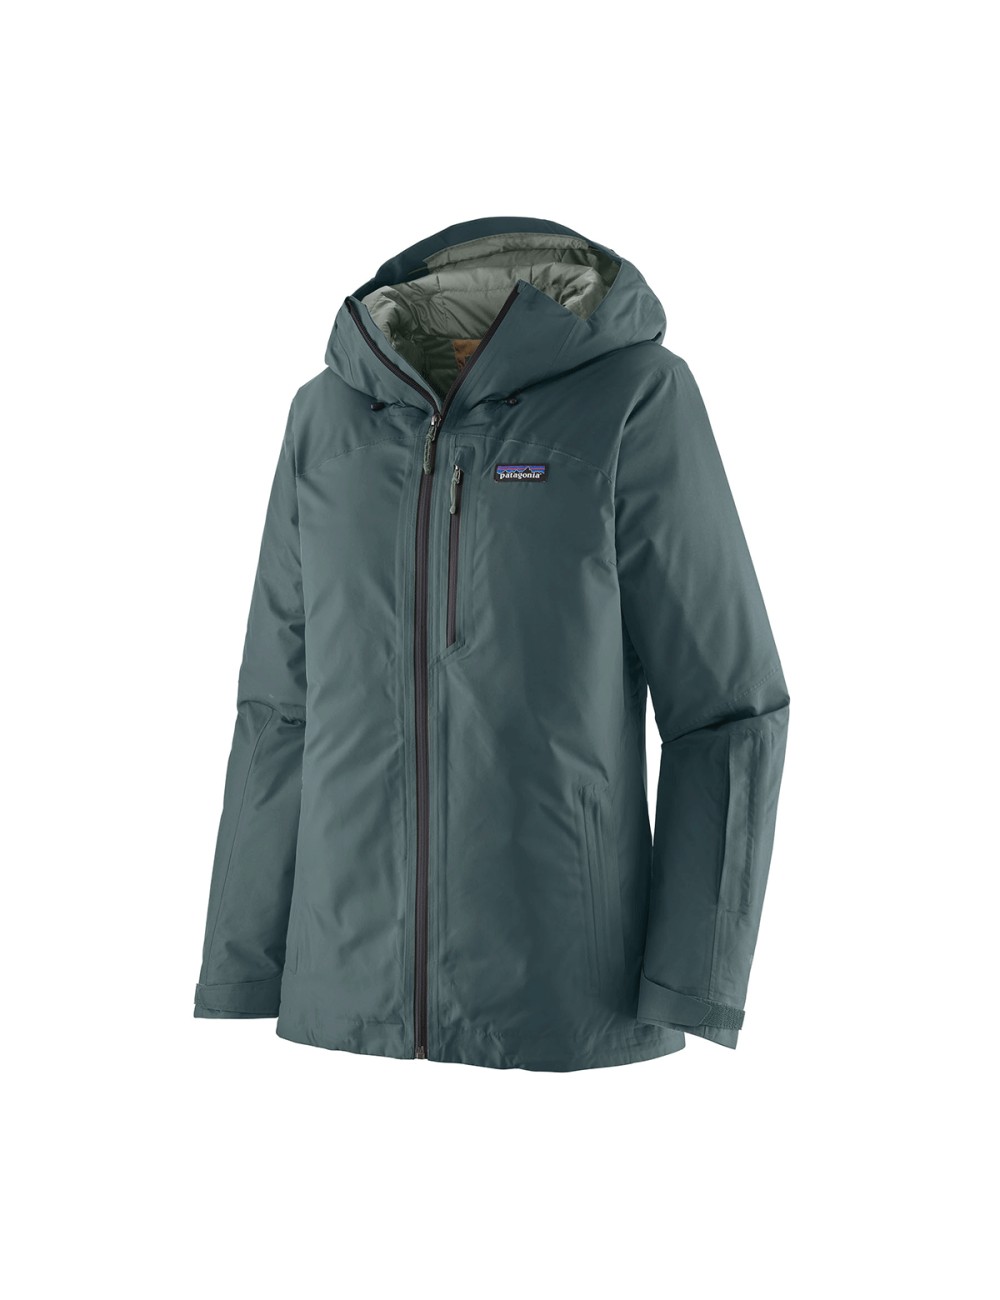 Patagonia Wms Insulated Powder Town Jacket